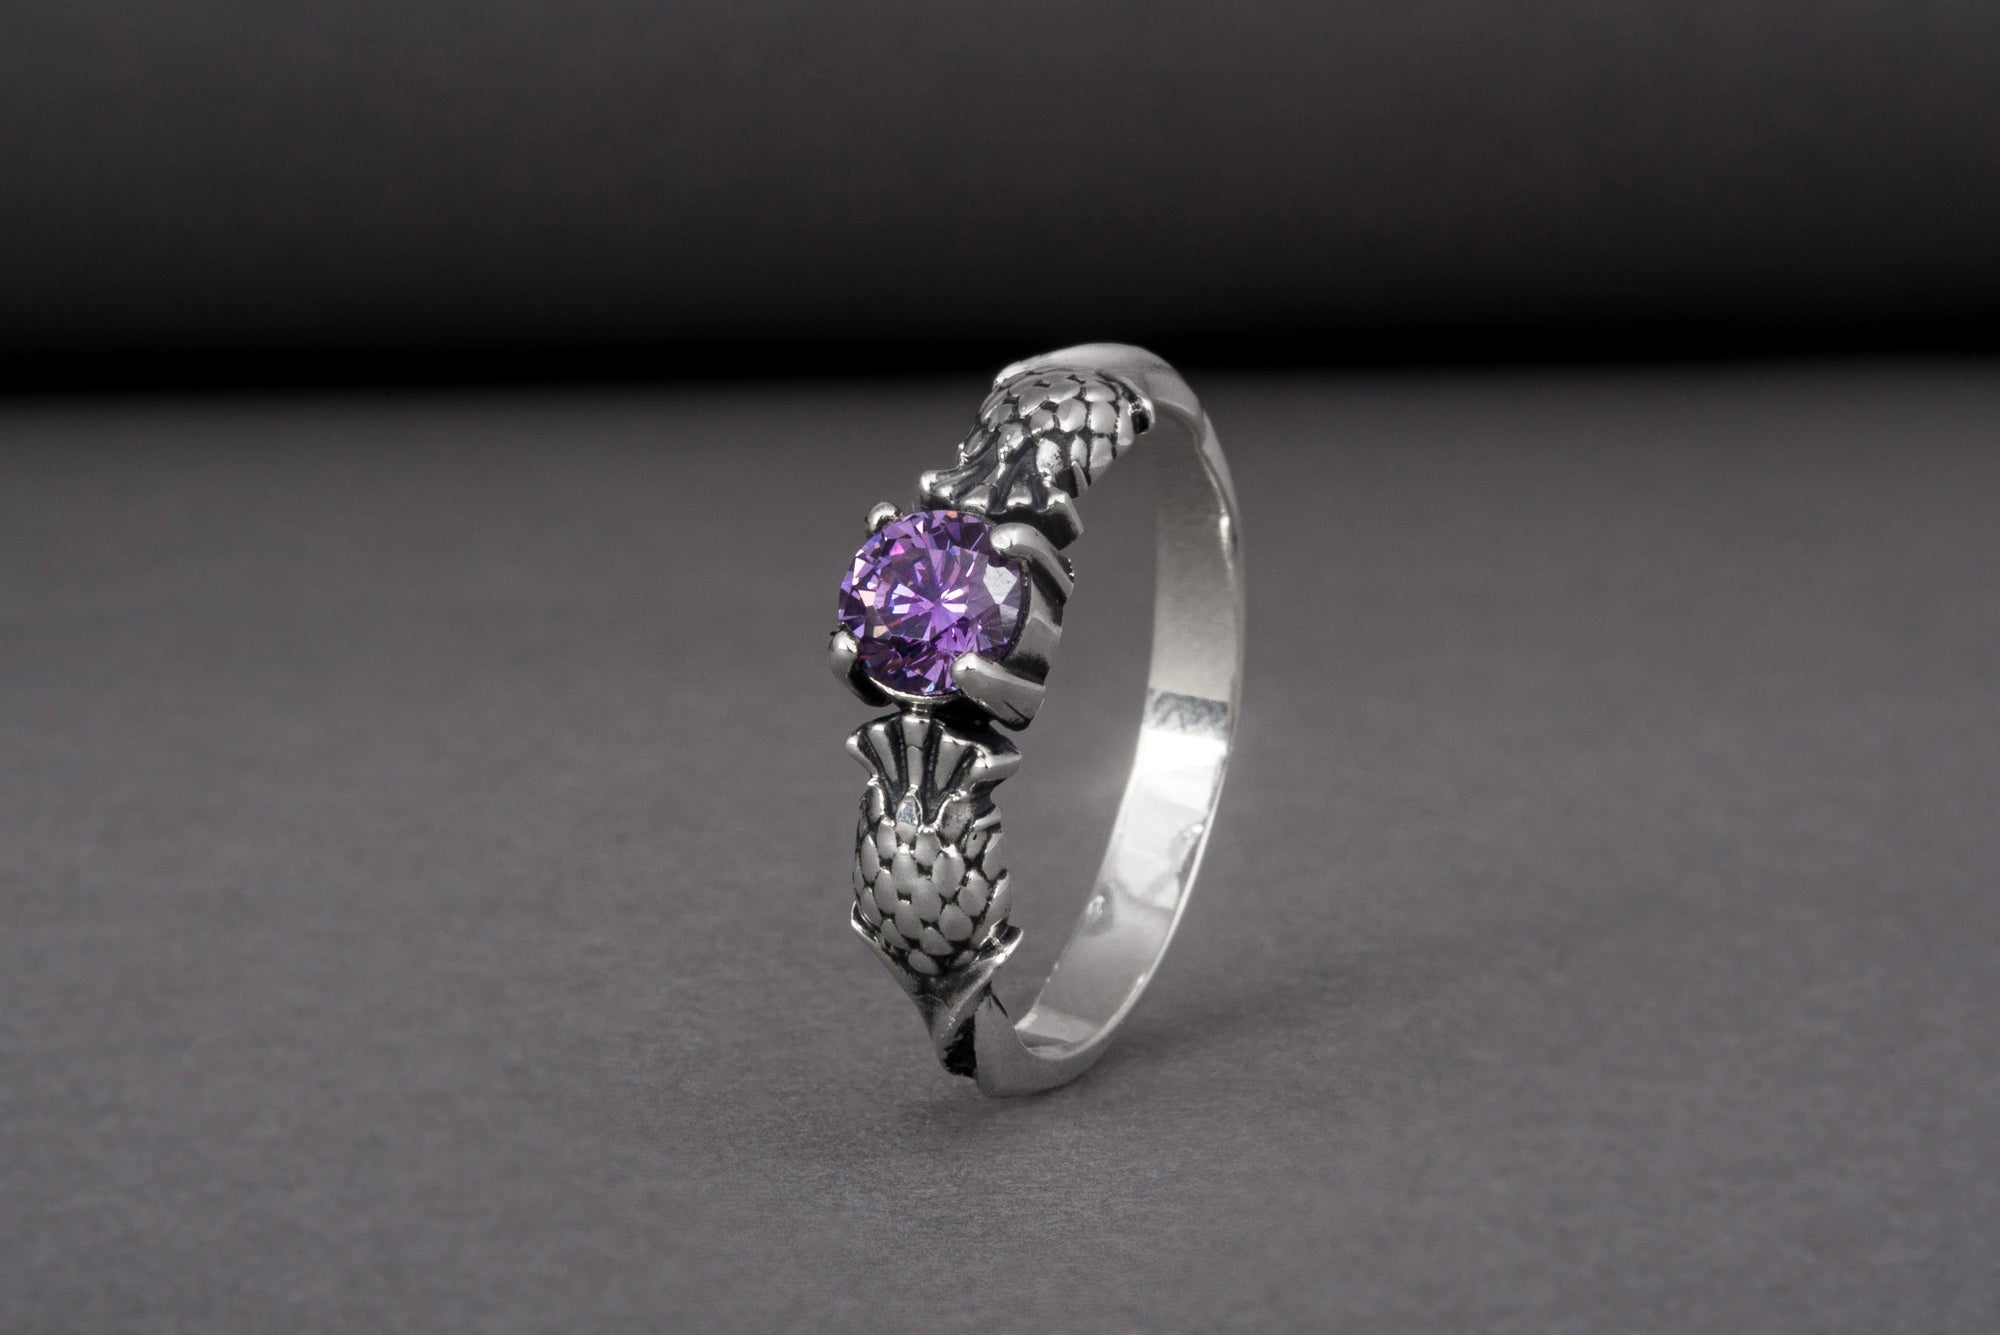 Handcrafted classic and wedding rings with precious stones